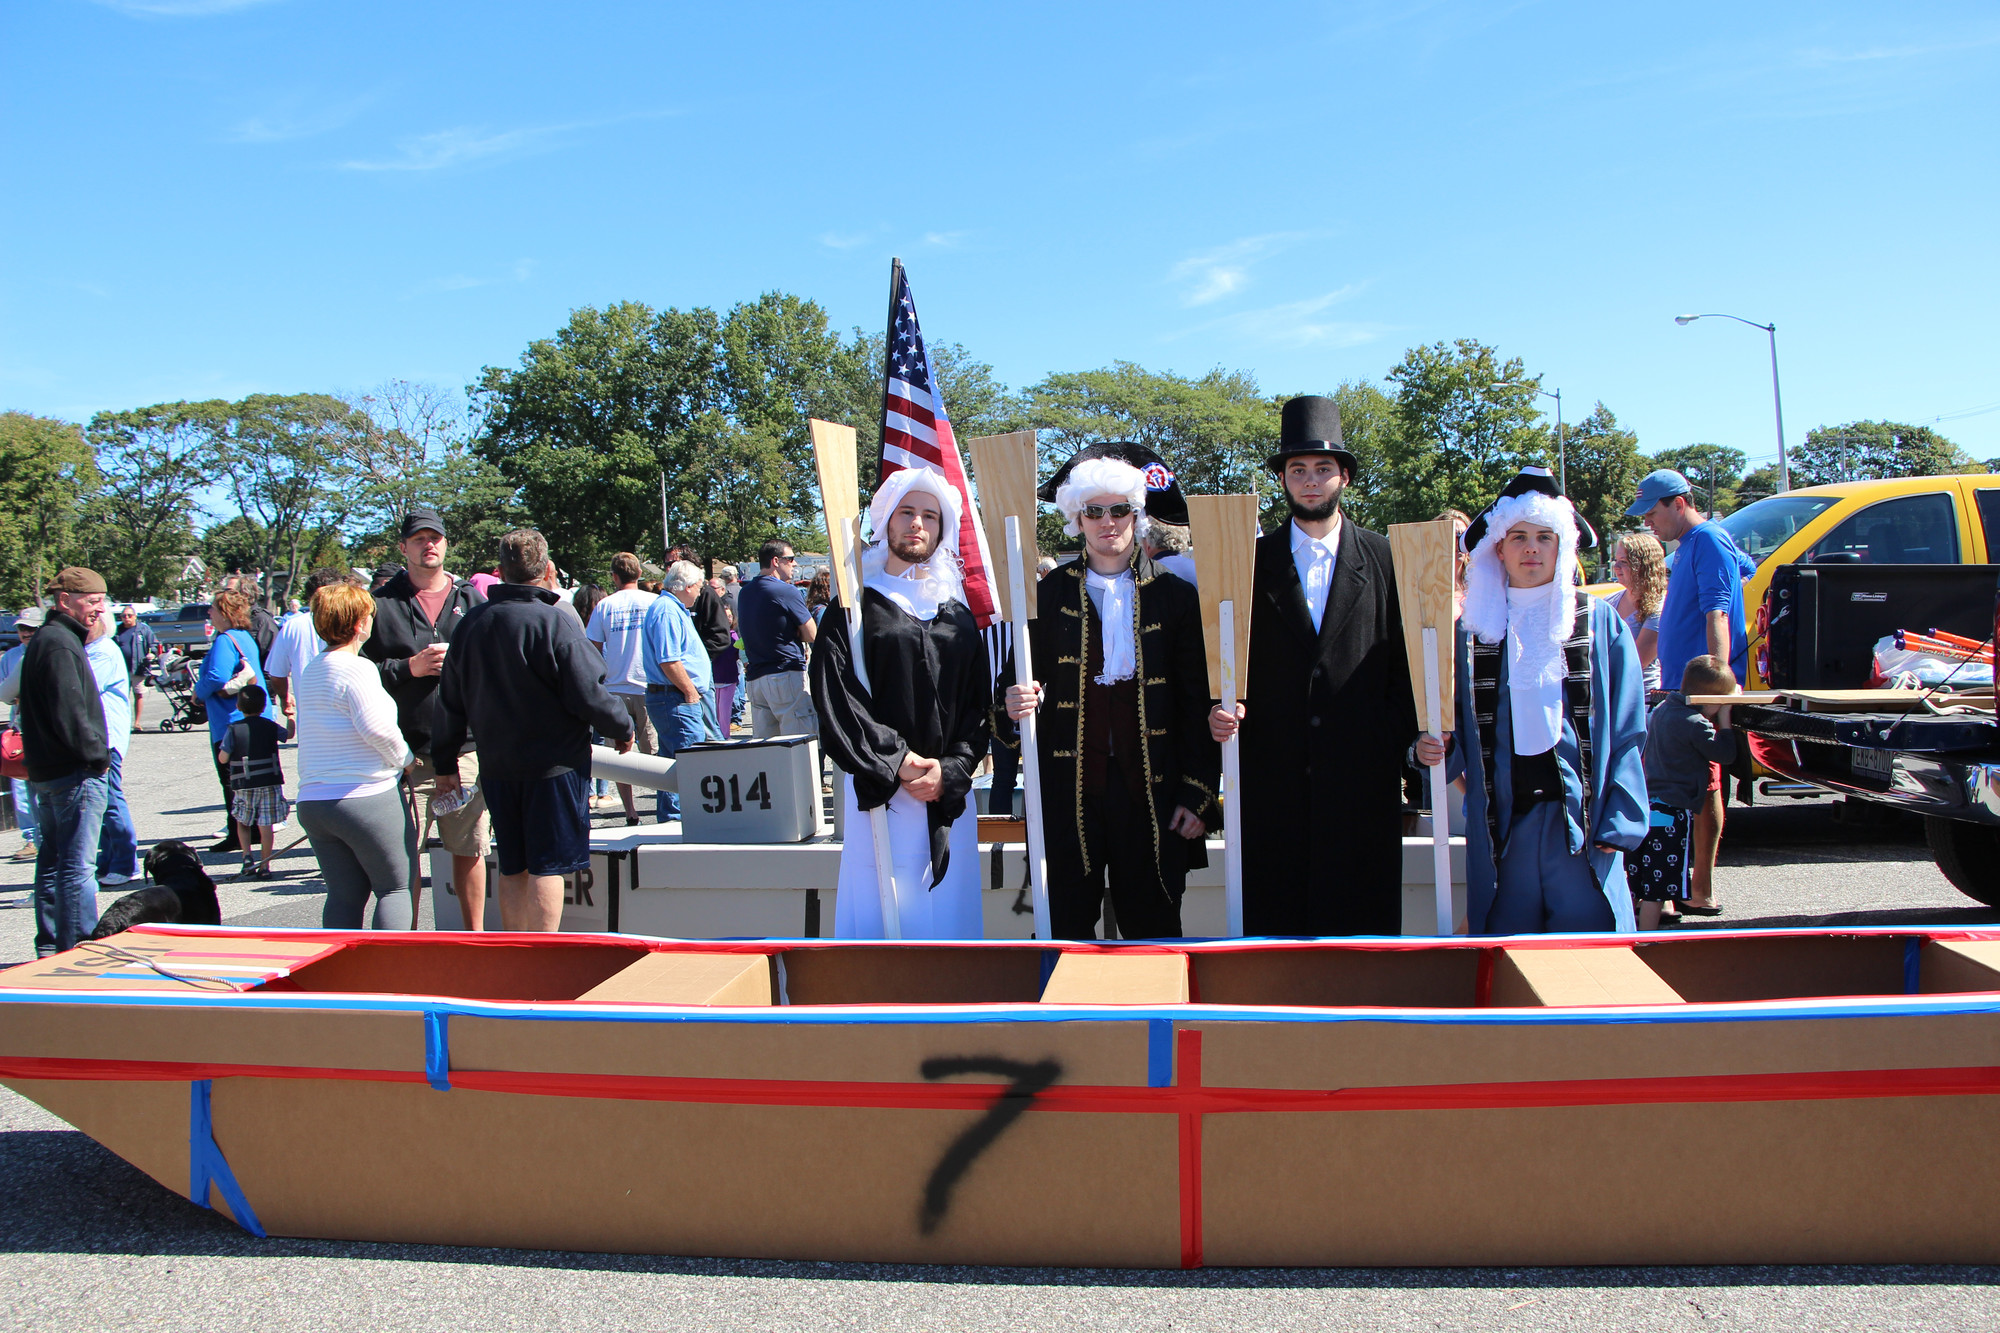 There was no shortage of creativity, especially for the guys who dressed up like historical figures for the race. From left, Dan Vako (Martha Washington), Brian O’Connor (George Washington), Connor McGowan (Abraham Lincoln) and Steve Hajny (Benjamin Franklin), set sail.